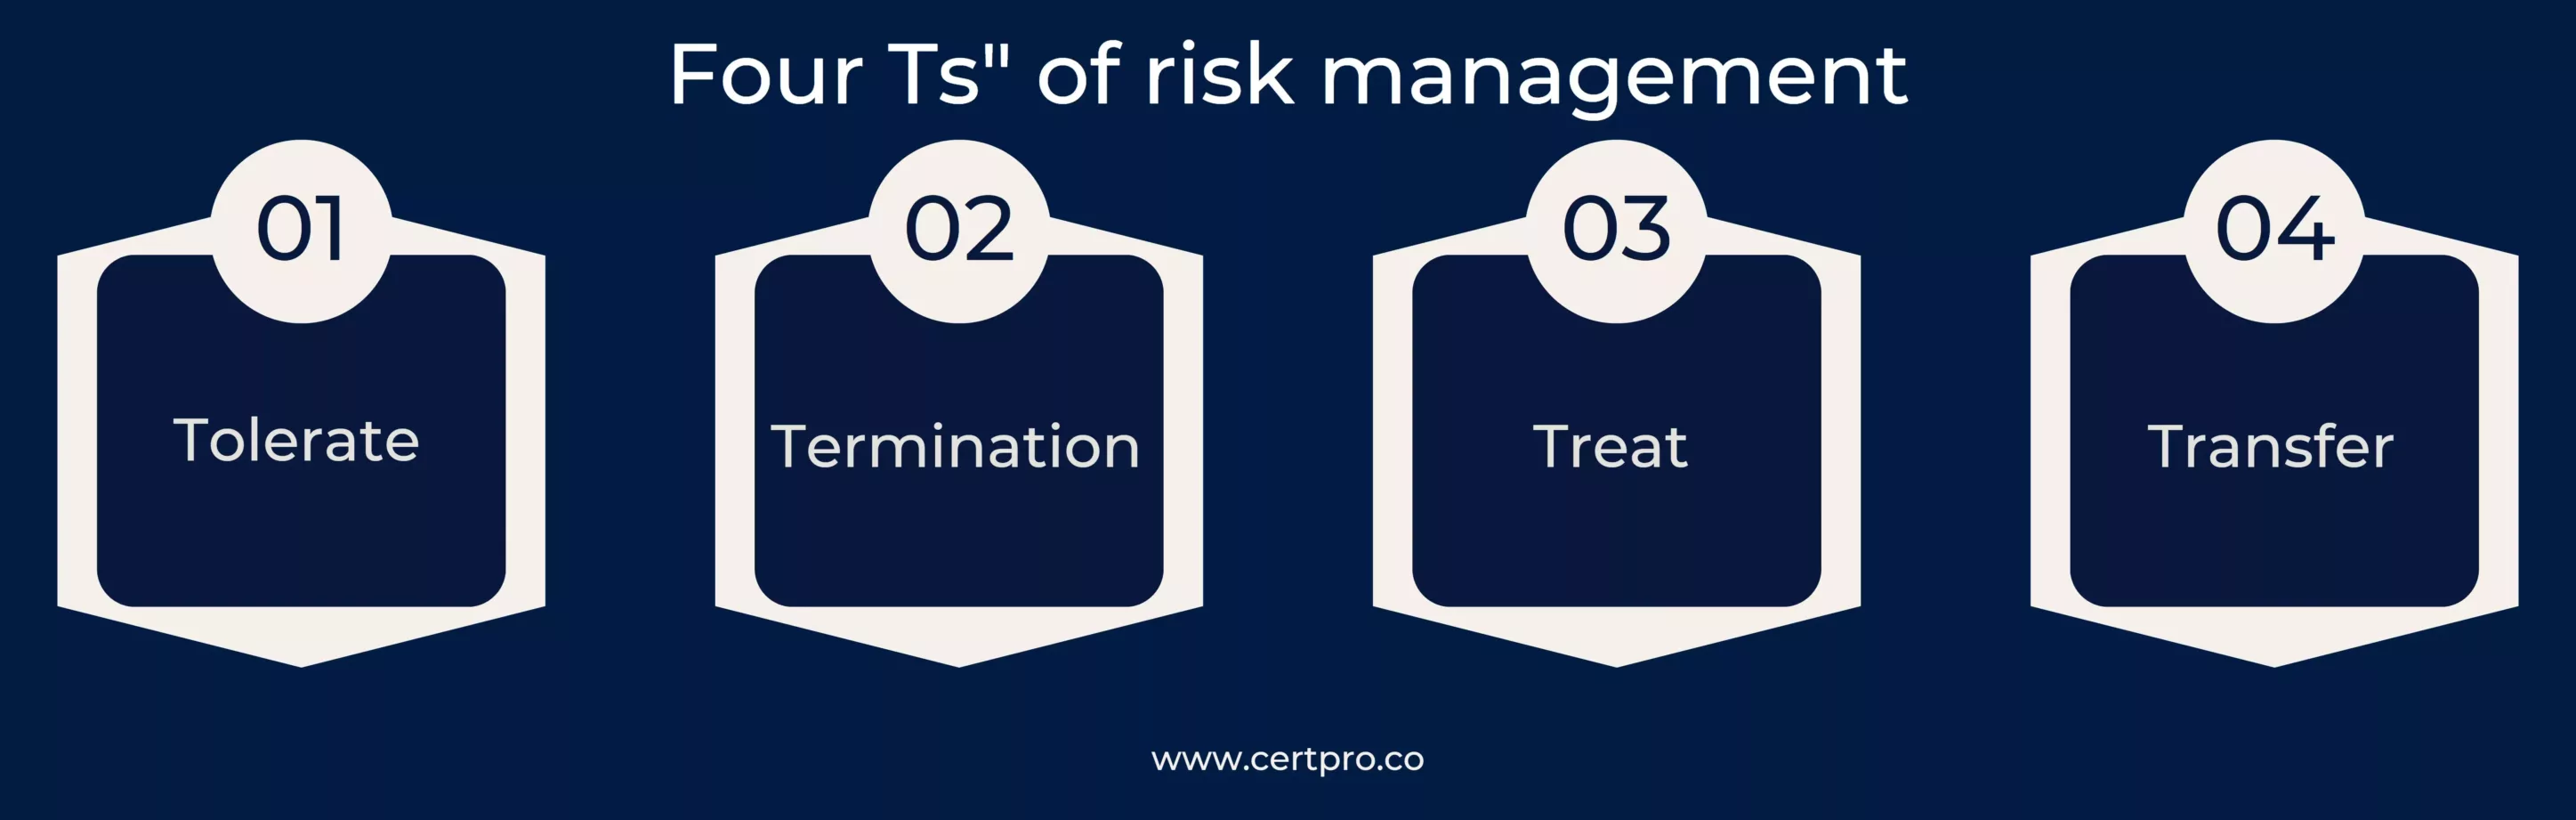 4 Ts of risk management